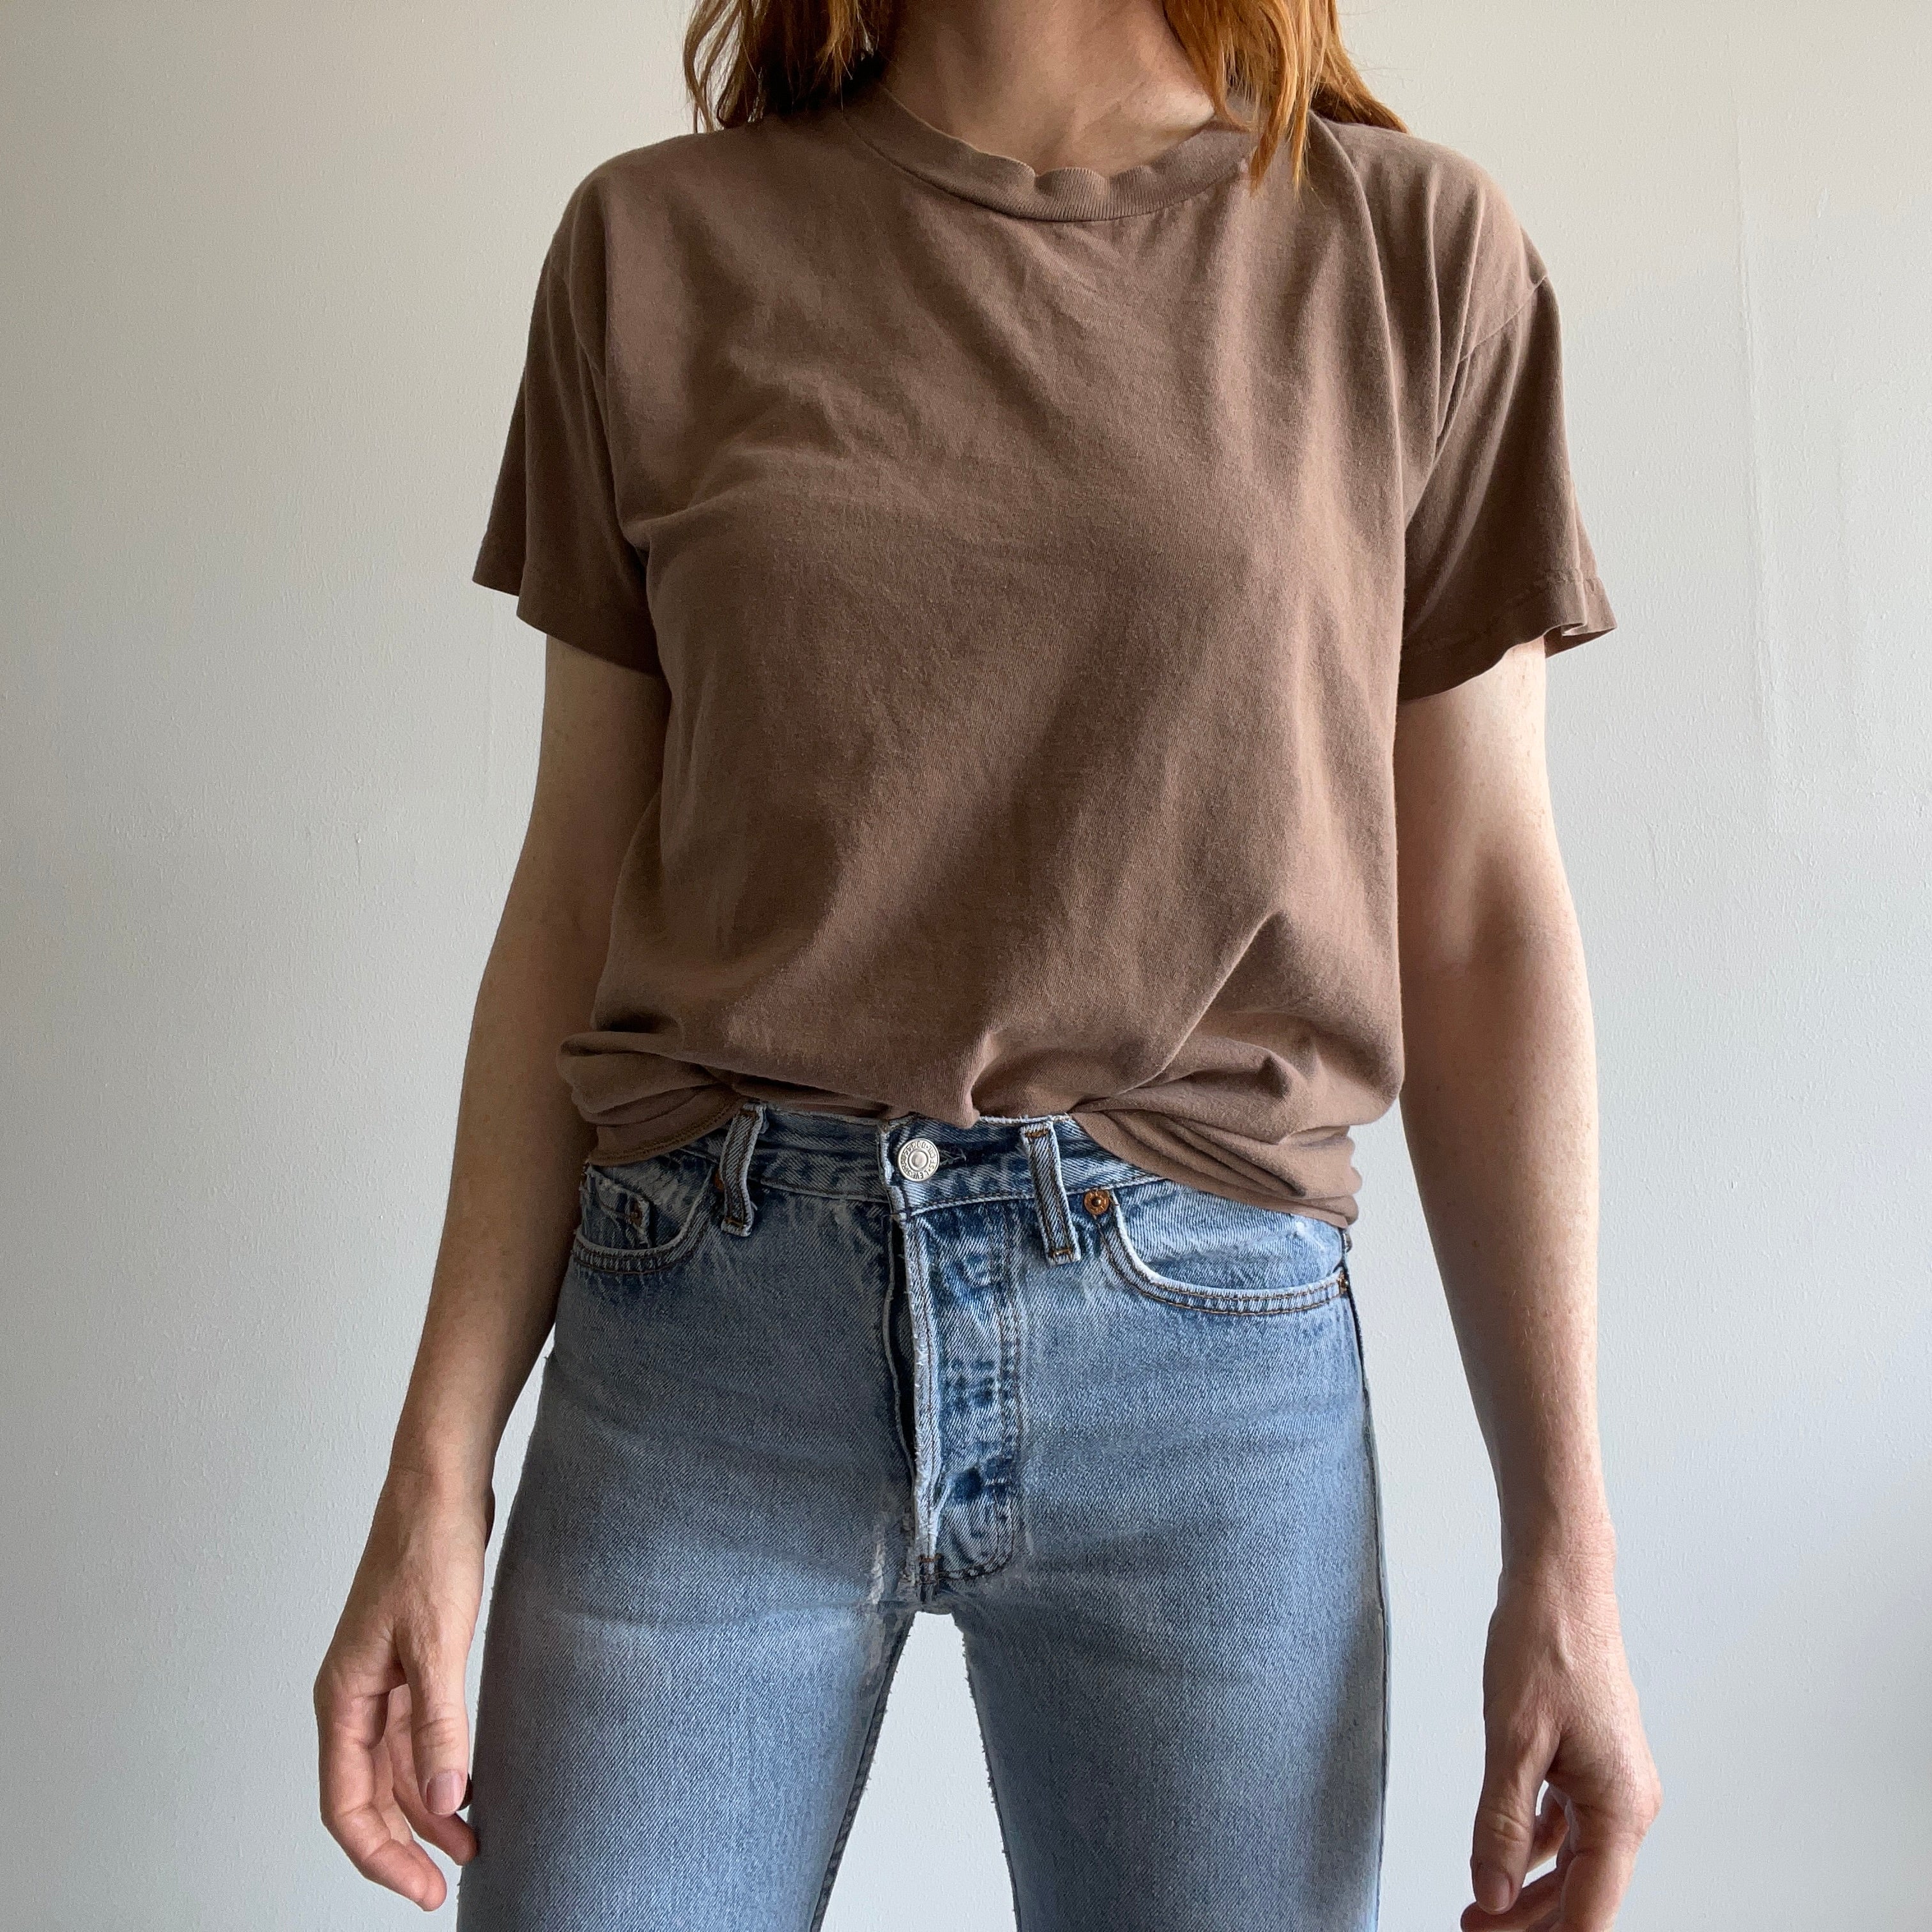 1990s Soft and Faded Army Tee